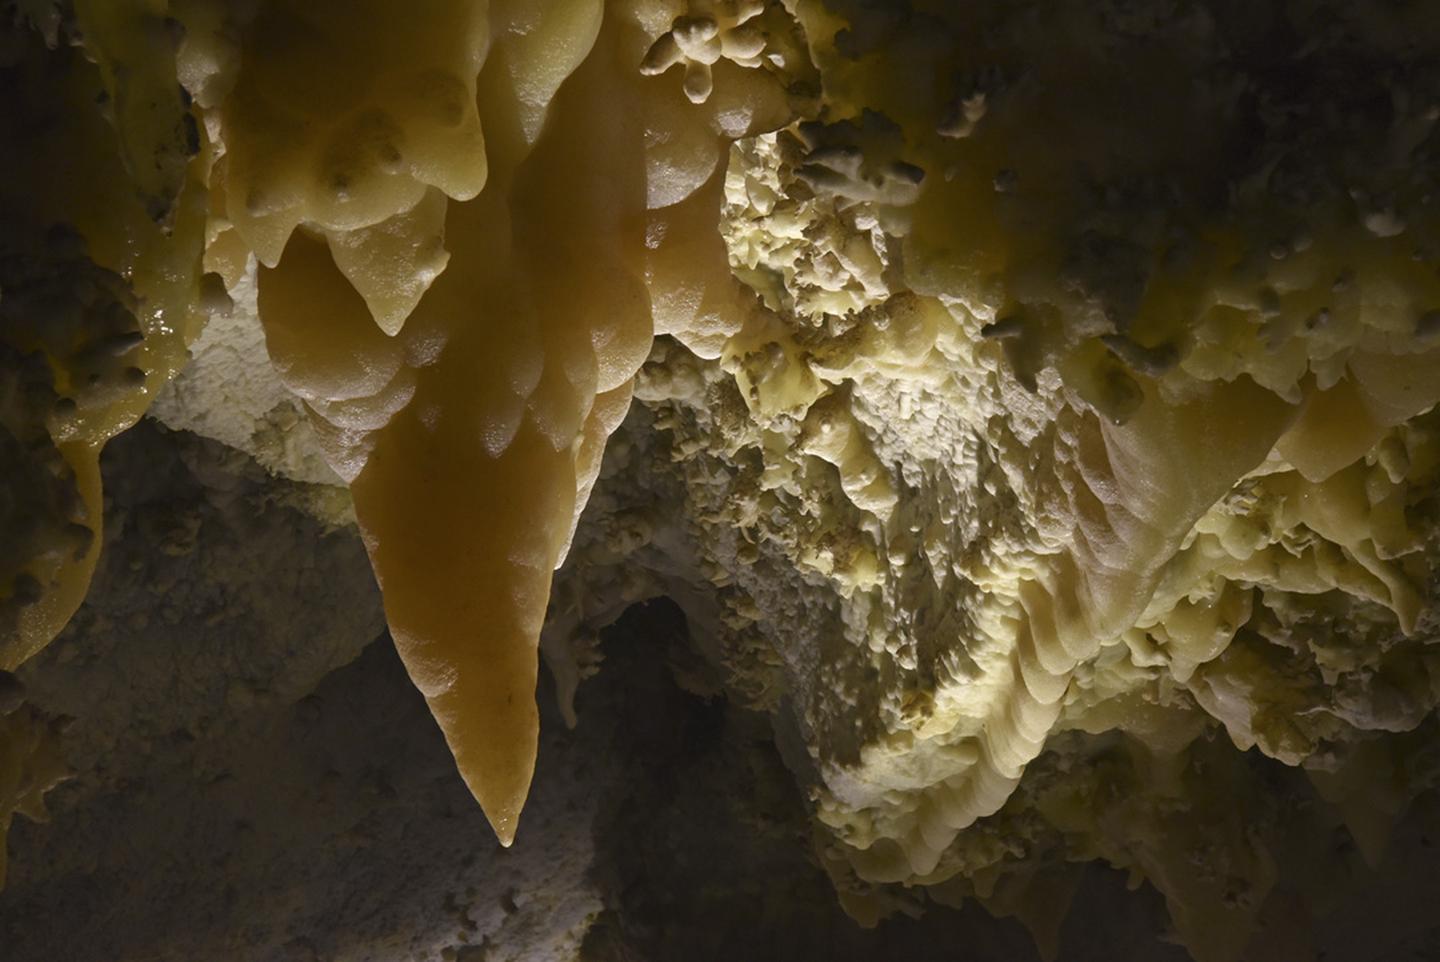 Yellow pointed cave formation clinging to the cave ceiling surrounded by other knobby formationsStalactites